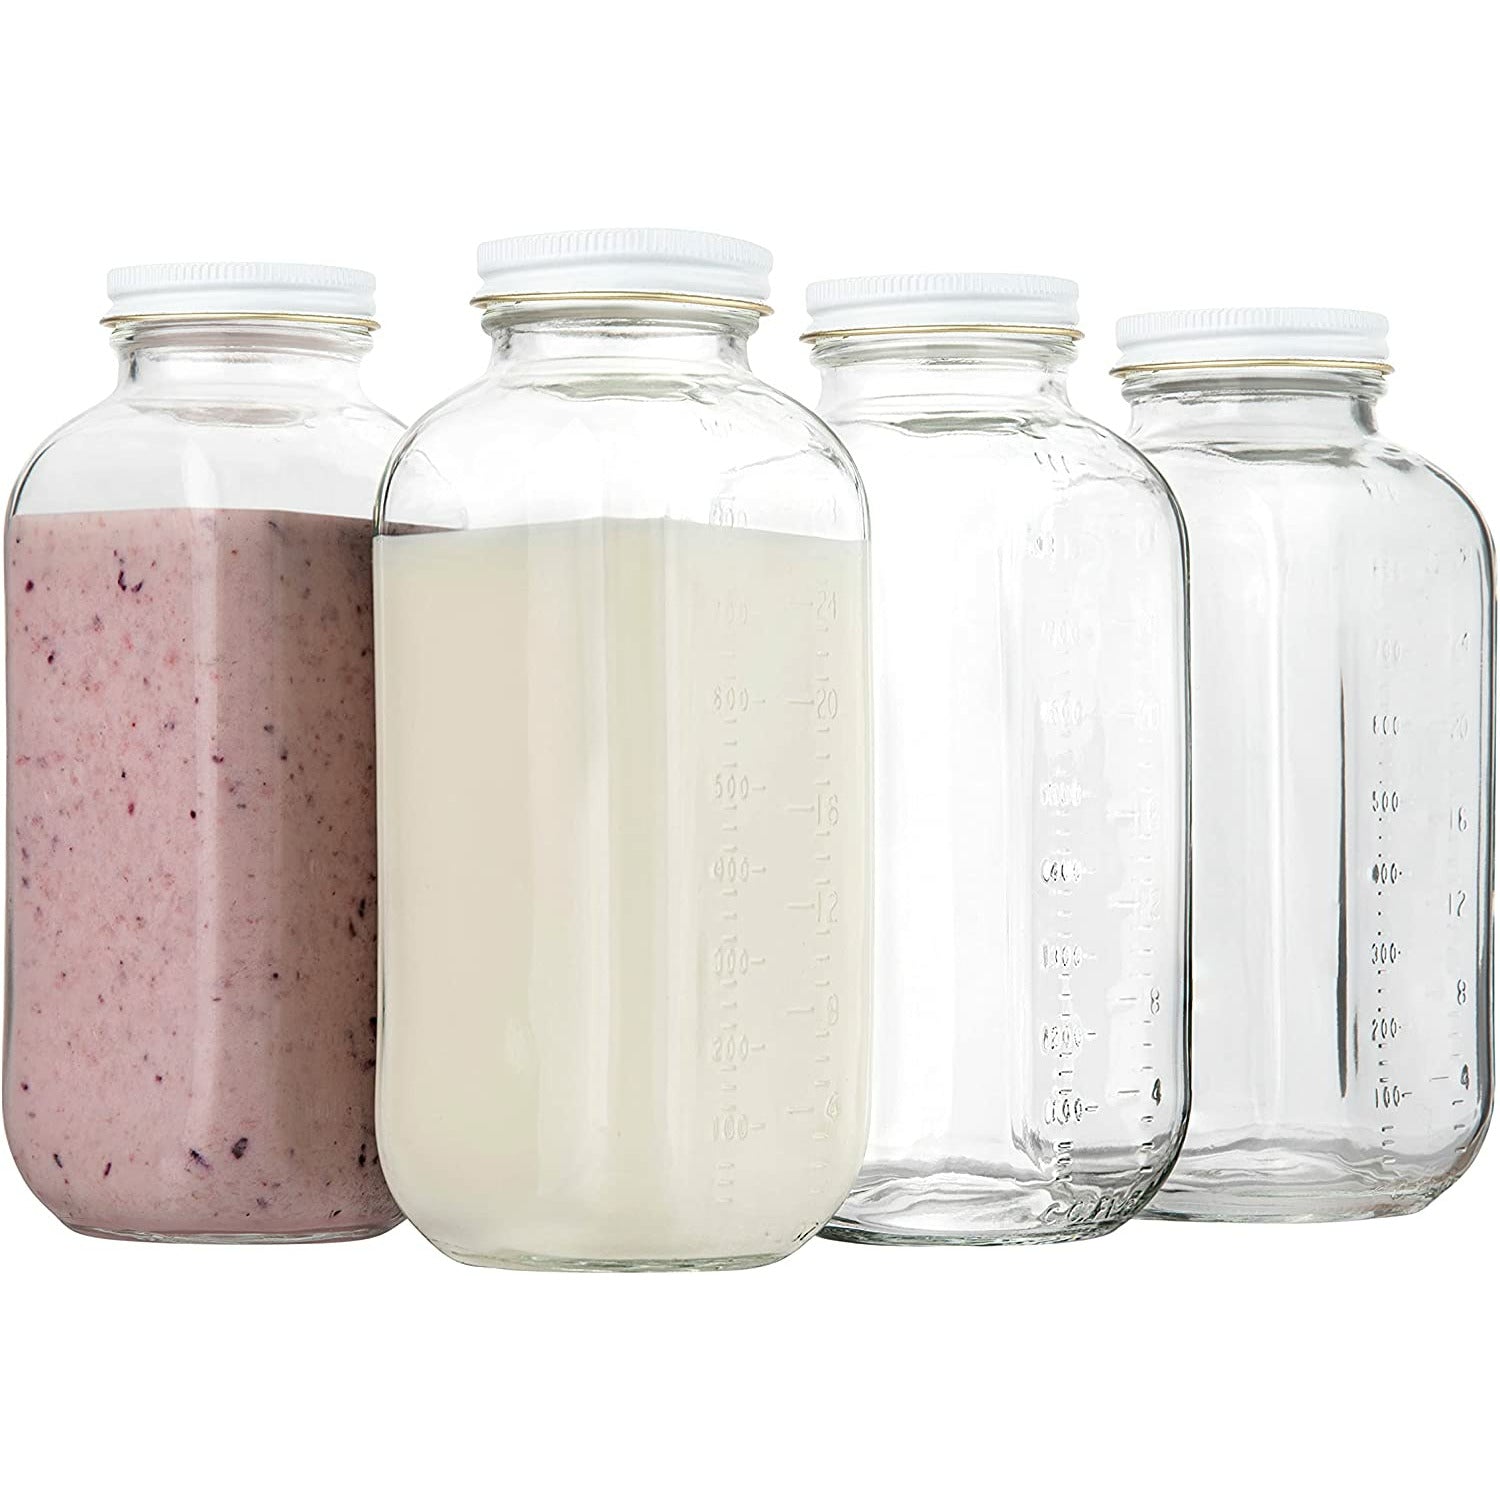 Kitchentoolz 33 Oz Square Glass Milk Bottle With Lids Perfect Milk Container  With Tamper Proof Lid and Pour Spout 1 Liter 